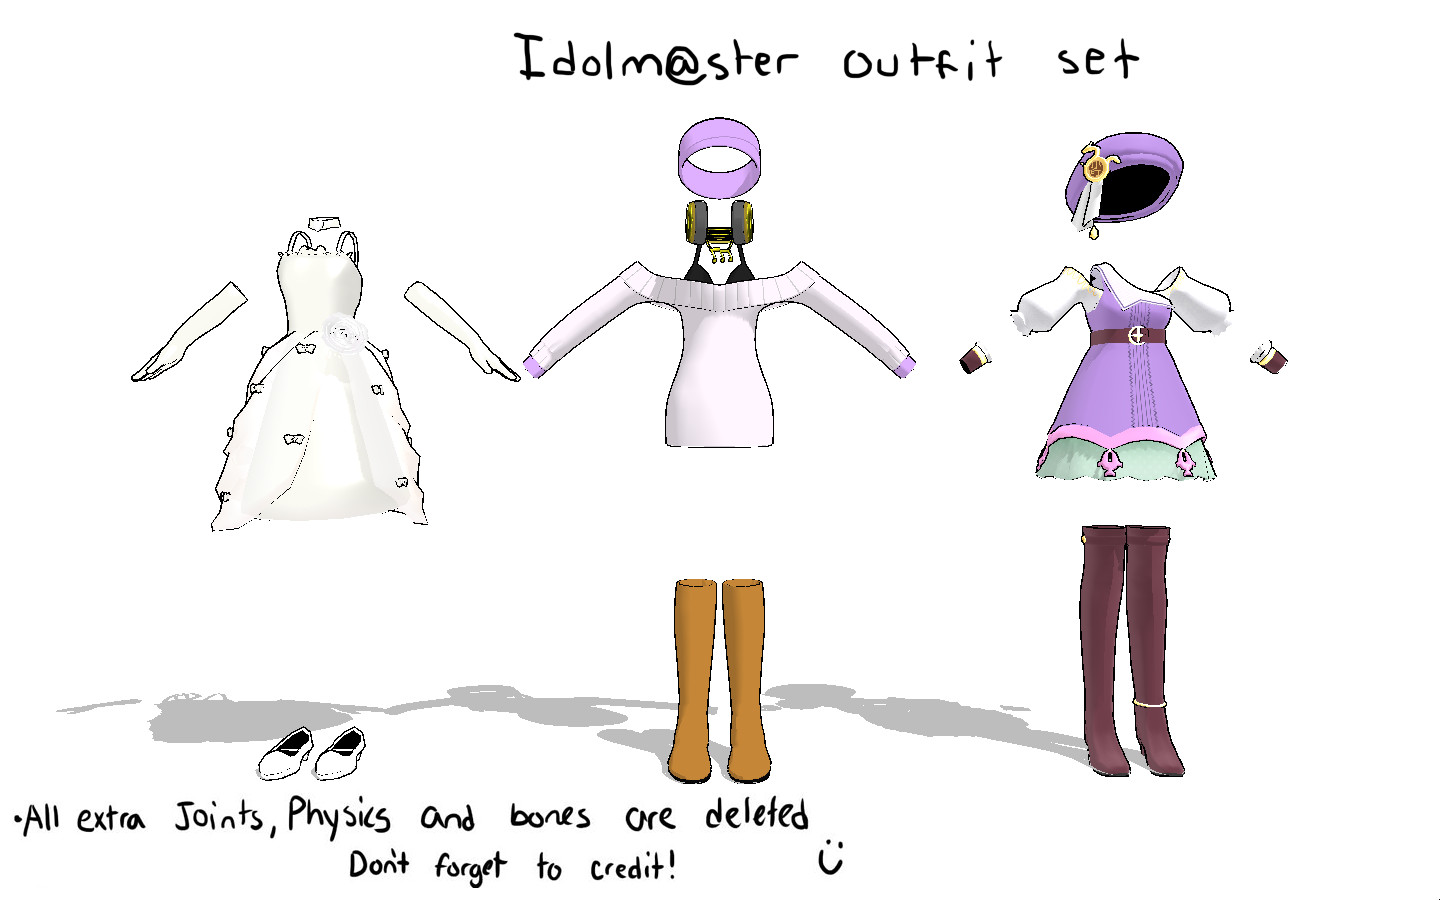 IDOLM@STER outfit set